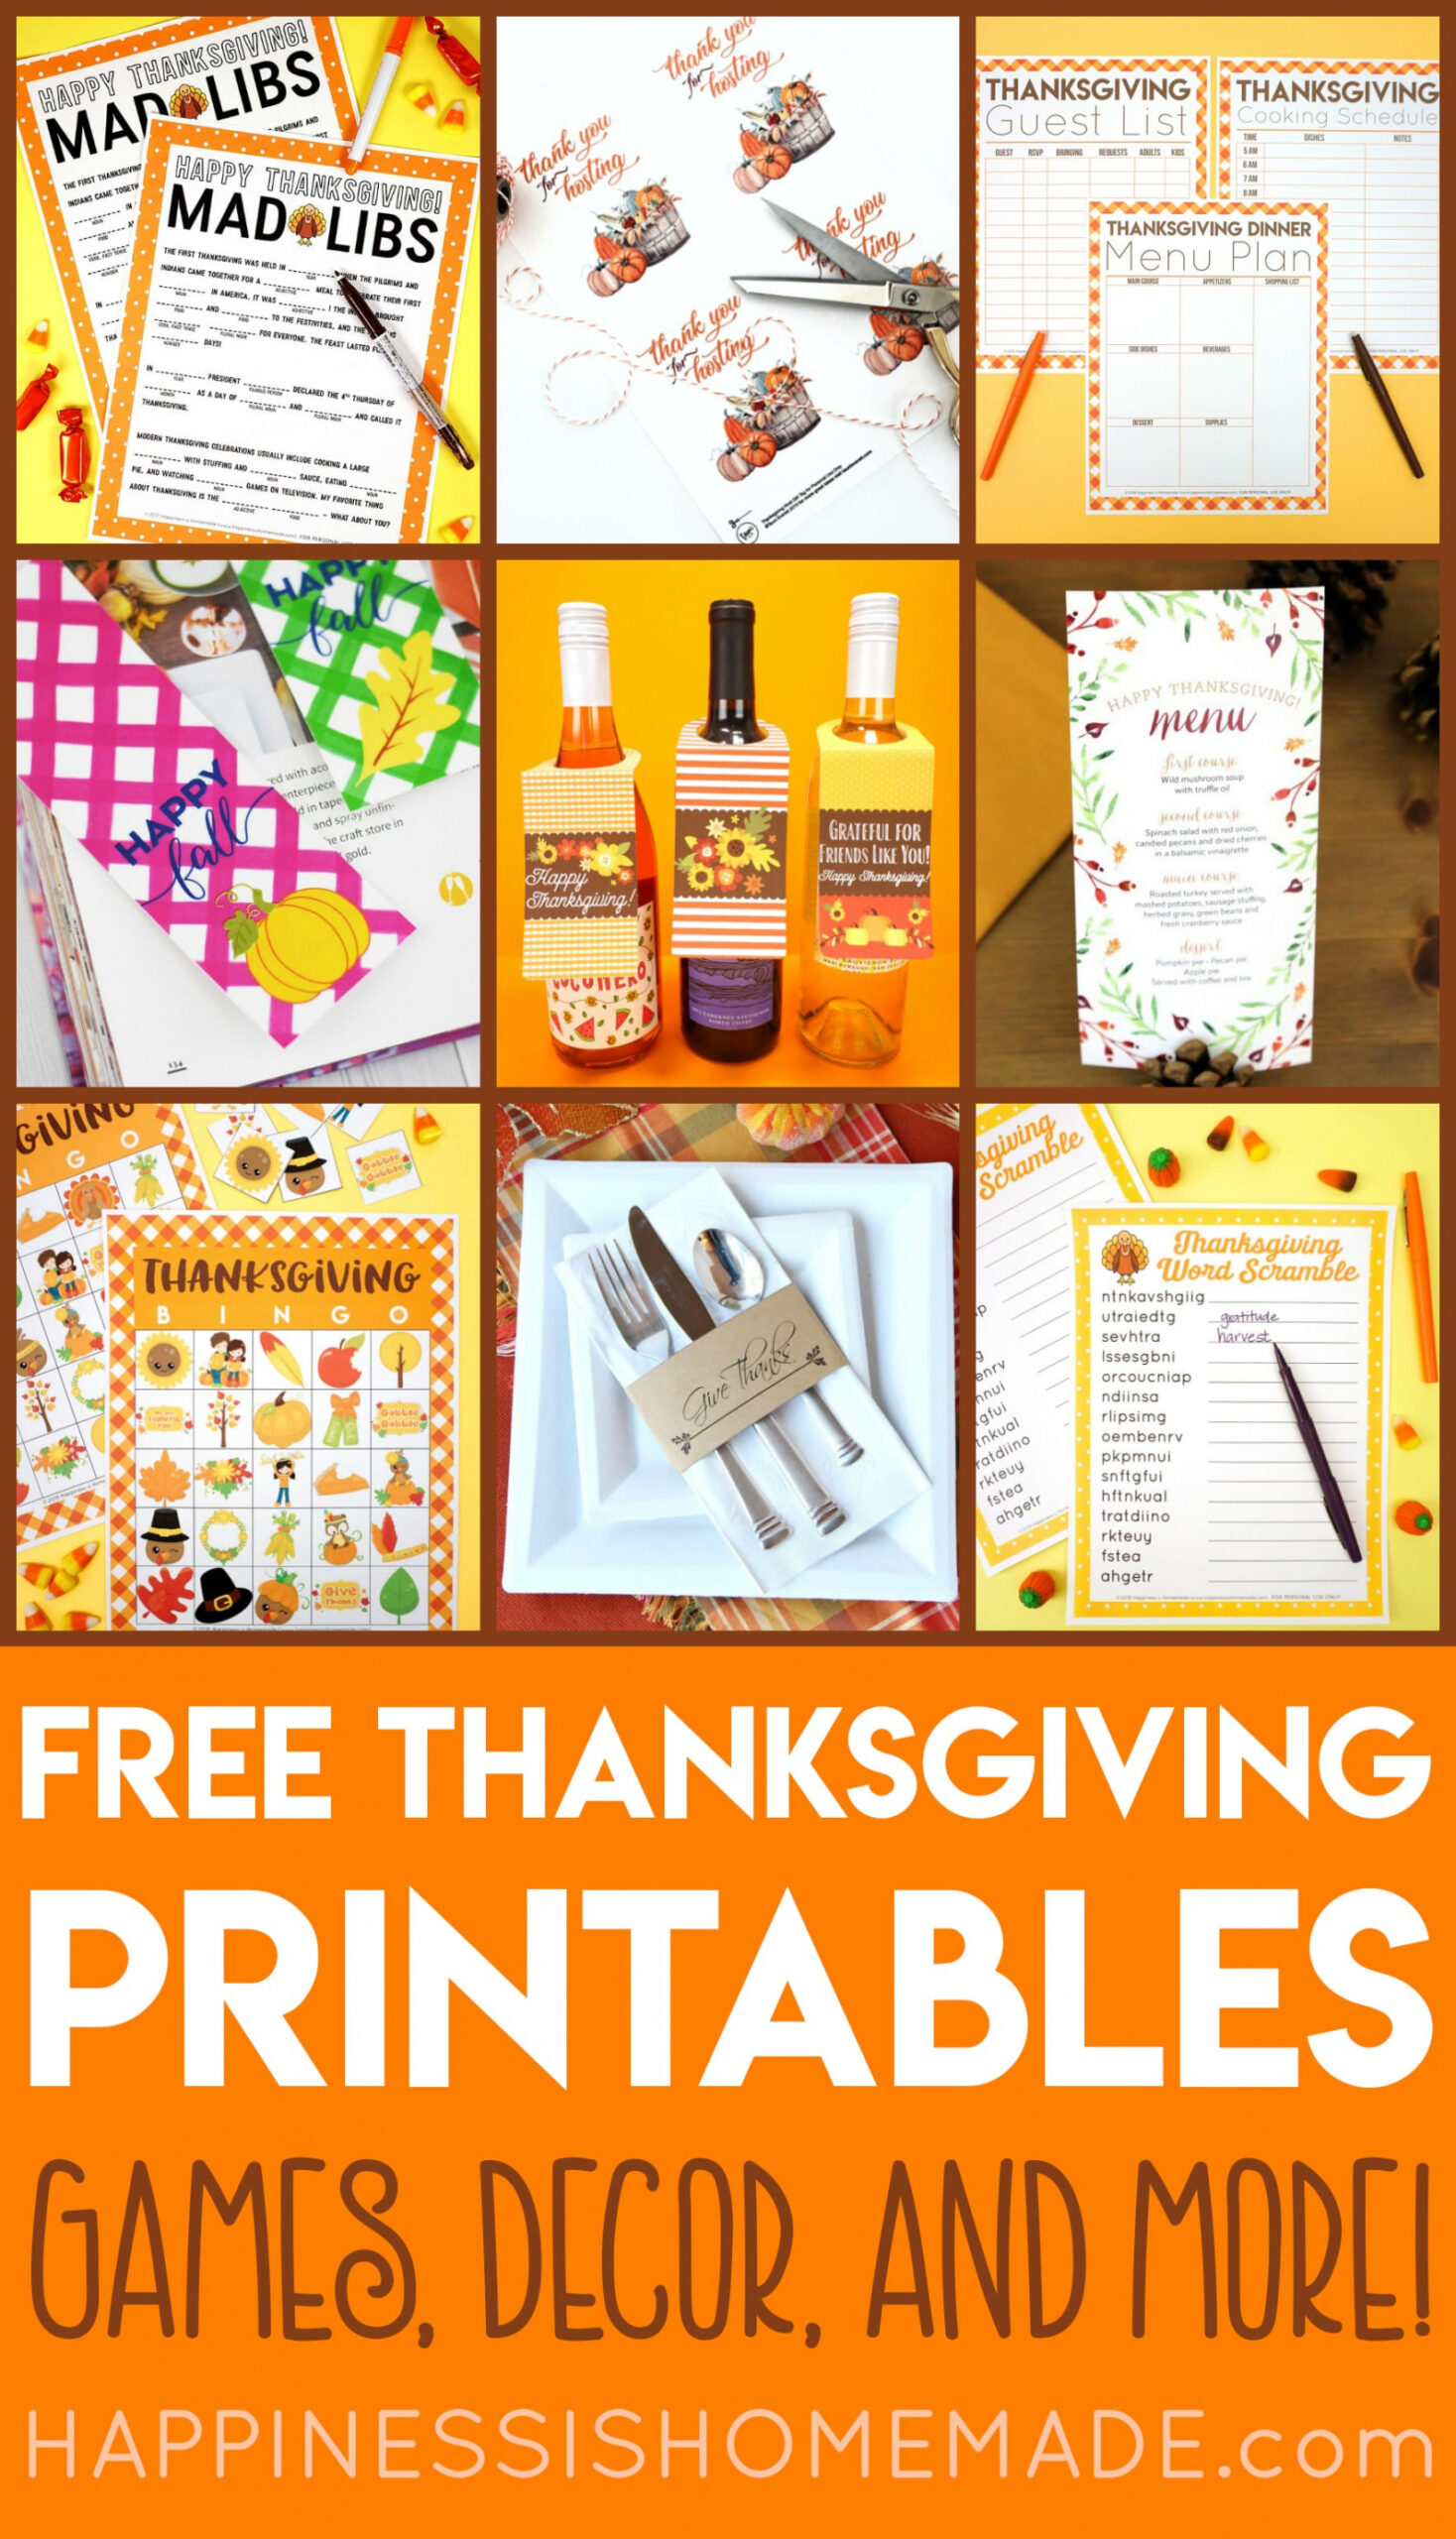 Free Thanksgiving Printables - Happiness is Homemade